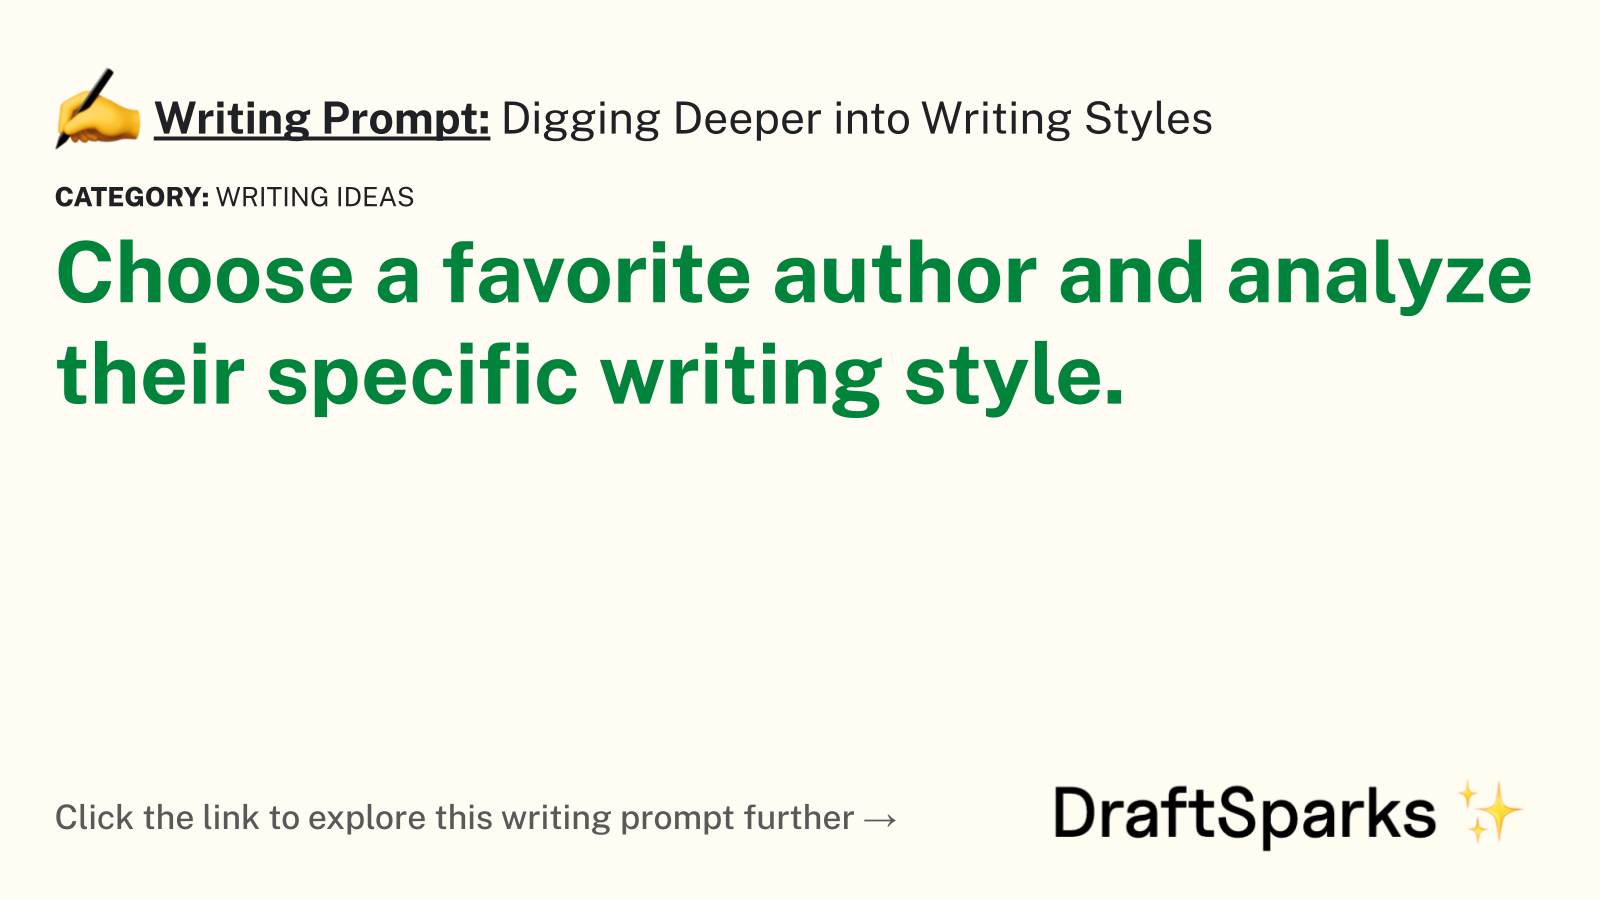 Digging Deeper into Writing Styles